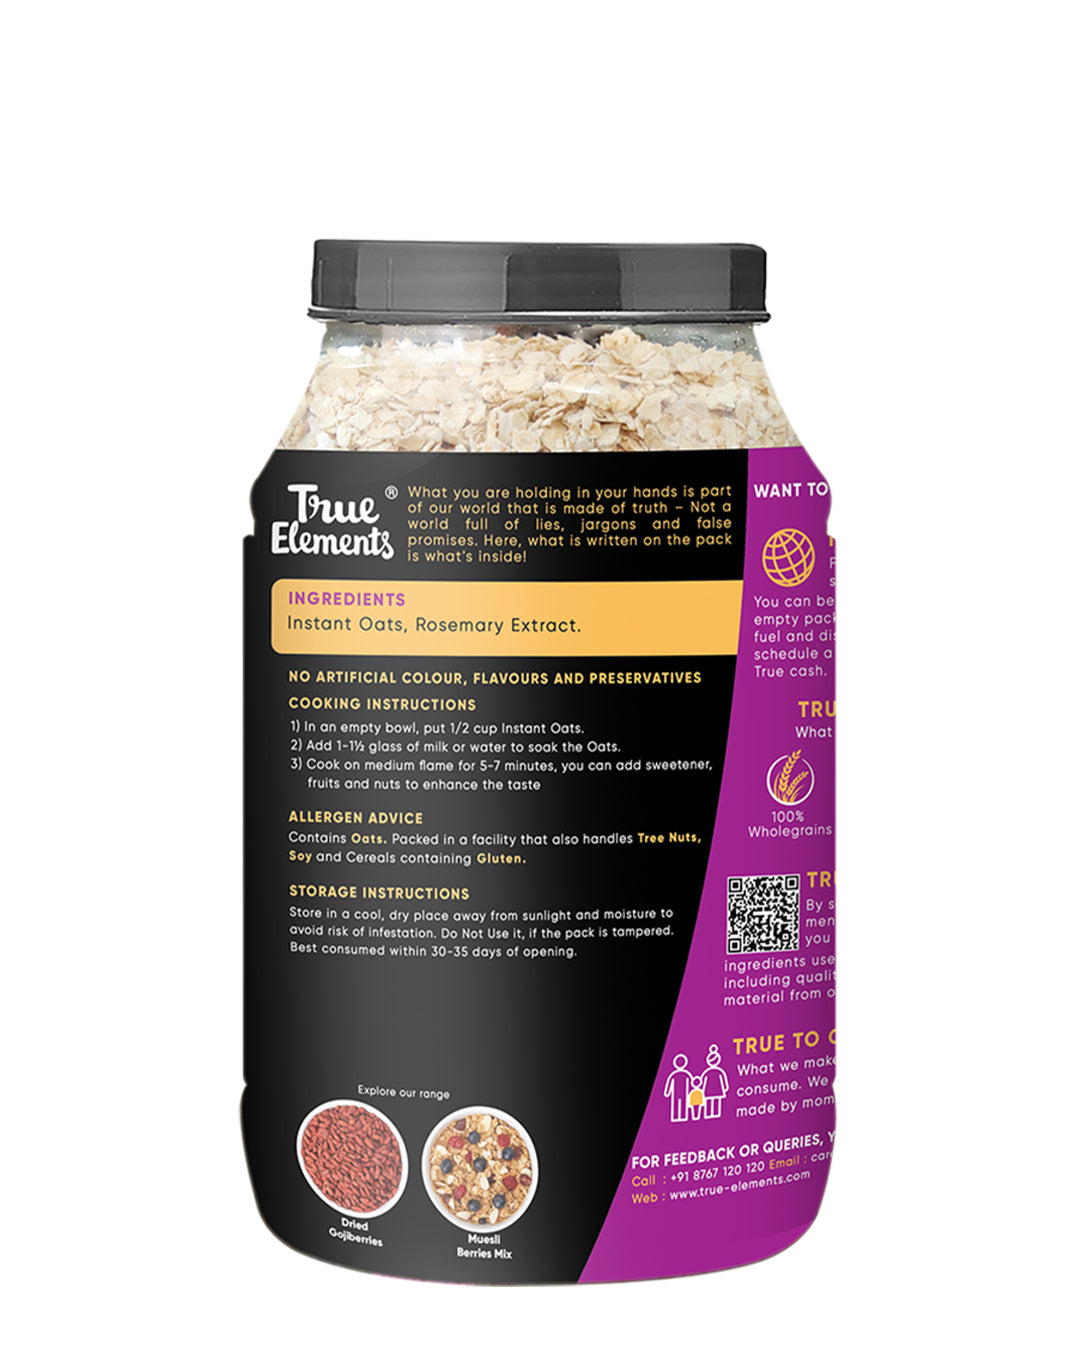 True elements oats ingredients and nutrients 